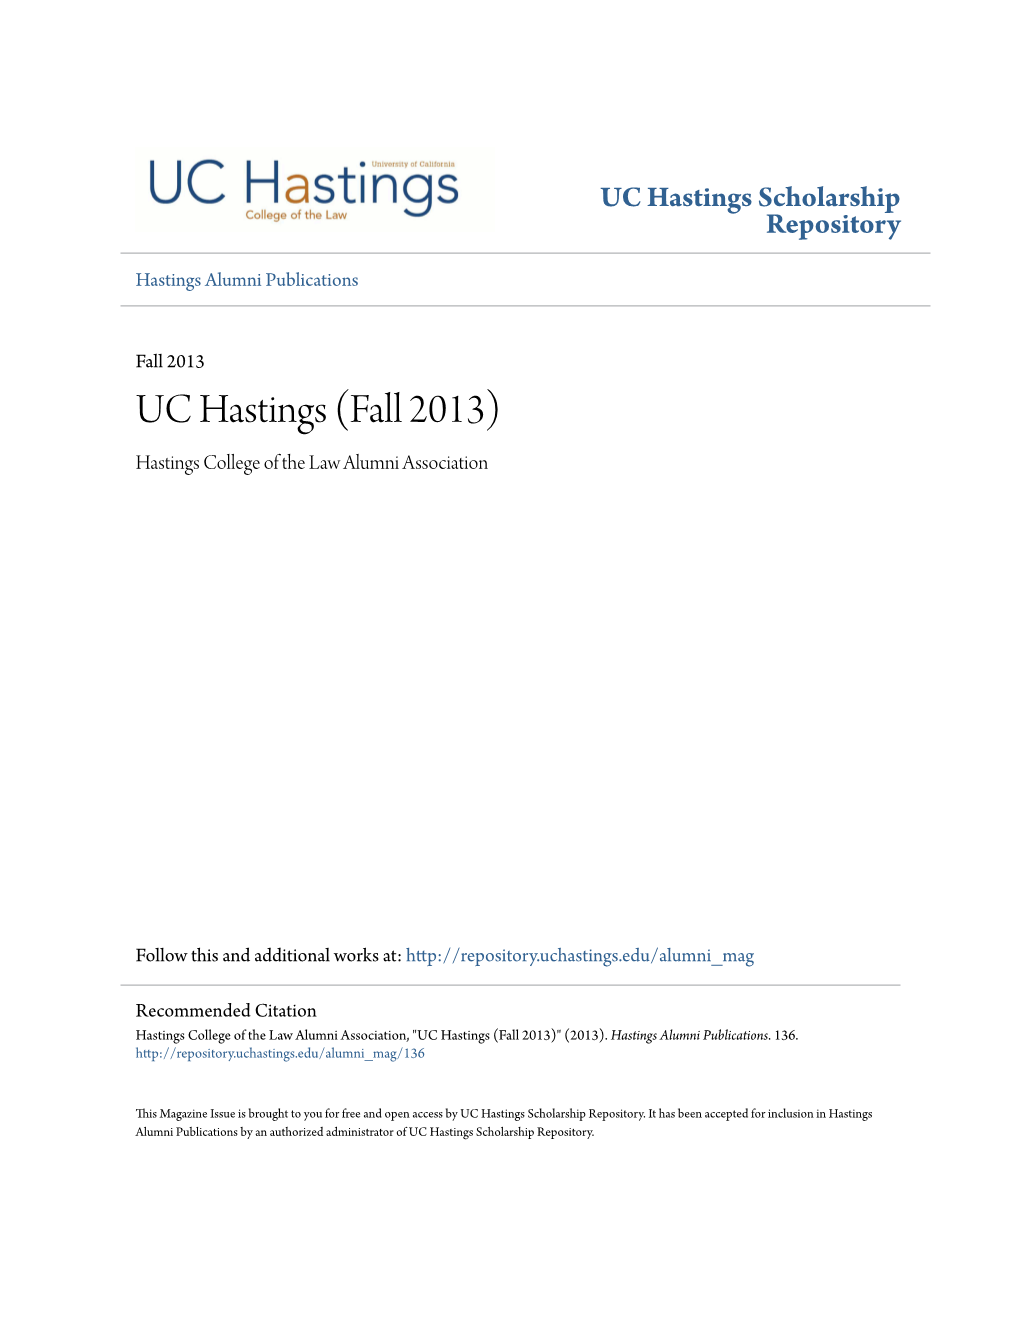 UC Hastings (Fall 2013) Hastings College of the Law Alumni Association